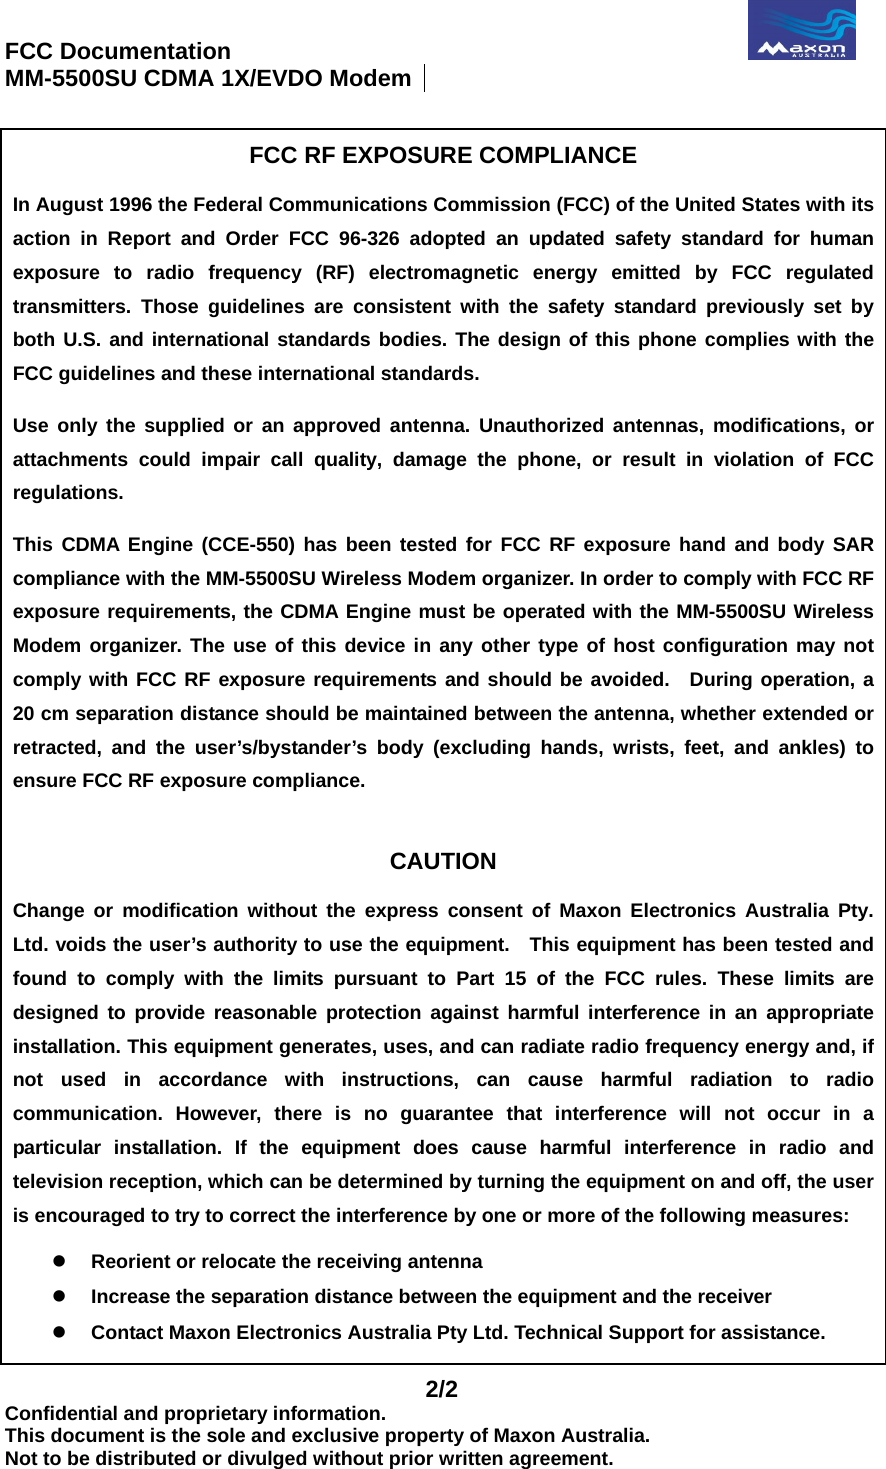 FCC Documentation                                              MM-5500SU CDMA 1X/EVDO Modem    2/2 Confidential and proprietary information. This document is the sole and exclusive property of Maxon Australia. Not to be distributed or divulged without prior written agreement.  FCC RF EXPOSURE COMPLIANCE  In August 1996 the Federal Communications Commission (FCC) of the United States with itsaction in Report and Order FCC 96-326 adopted an updated safety standard for human exposure to radio frequency (RF) electromagnetic energy emitted by FCC regulatedtransmitters. Those guidelines are consistent with the safety standard previously set byboth U.S. and international standards bodies. The design of this phone complies with theFCC guidelines and these international standards. Use only the supplied or an approved antenna. Unauthorized antennas, modifications, orattachments could impair call quality, damage the phone, or result in violation of FCCregulations. This CDMA Engine (CCE-550) has been tested for FCC RF exposure hand and body SAR compliance with the MM-5500SU Wireless Modem organizer. In order to comply with FCC RF exposure requirements, the CDMA Engine must be operated with the MM-5500SU Wireless Modem organizer. The use of this device in any other type of host configuration may not comply with FCC RF exposure requirements and should be avoided.  During operation, a 20 cm separation distance should be maintained between the antenna, whether extended orretracted, and the user’s/bystander’s body (excluding hands, wrists, feet, and ankles) to ensure FCC RF exposure compliance.  CAUTION  Change or modification without the express consent of Maxon Electronics Australia Pty. Ltd. voids the user’s authority to use the equipment.  This equipment has been tested and found to comply with the limits pursuant to Part 15 of the FCC rules. These limits are designed to provide reasonable protection against harmful interference in an appropriateinstallation. This equipment generates, uses, and can radiate radio frequency energy and, if not used in accordance with instructions, can cause harmful radiation to radiocommunication. However, there is no guarantee that interference will not occur in aparticular installation. If the equipment does cause harmful interference in radio and television reception, which can be determined by turning the equipment on and off, the useris encouraged to try to correct the interference by one or more of the following measures:   Reorient or relocate the receiving antenna   Increase the separation distance between the equipment and the receiver   Contact Maxon Electronics Australia Pty Ltd. Technical Support for assistance. 